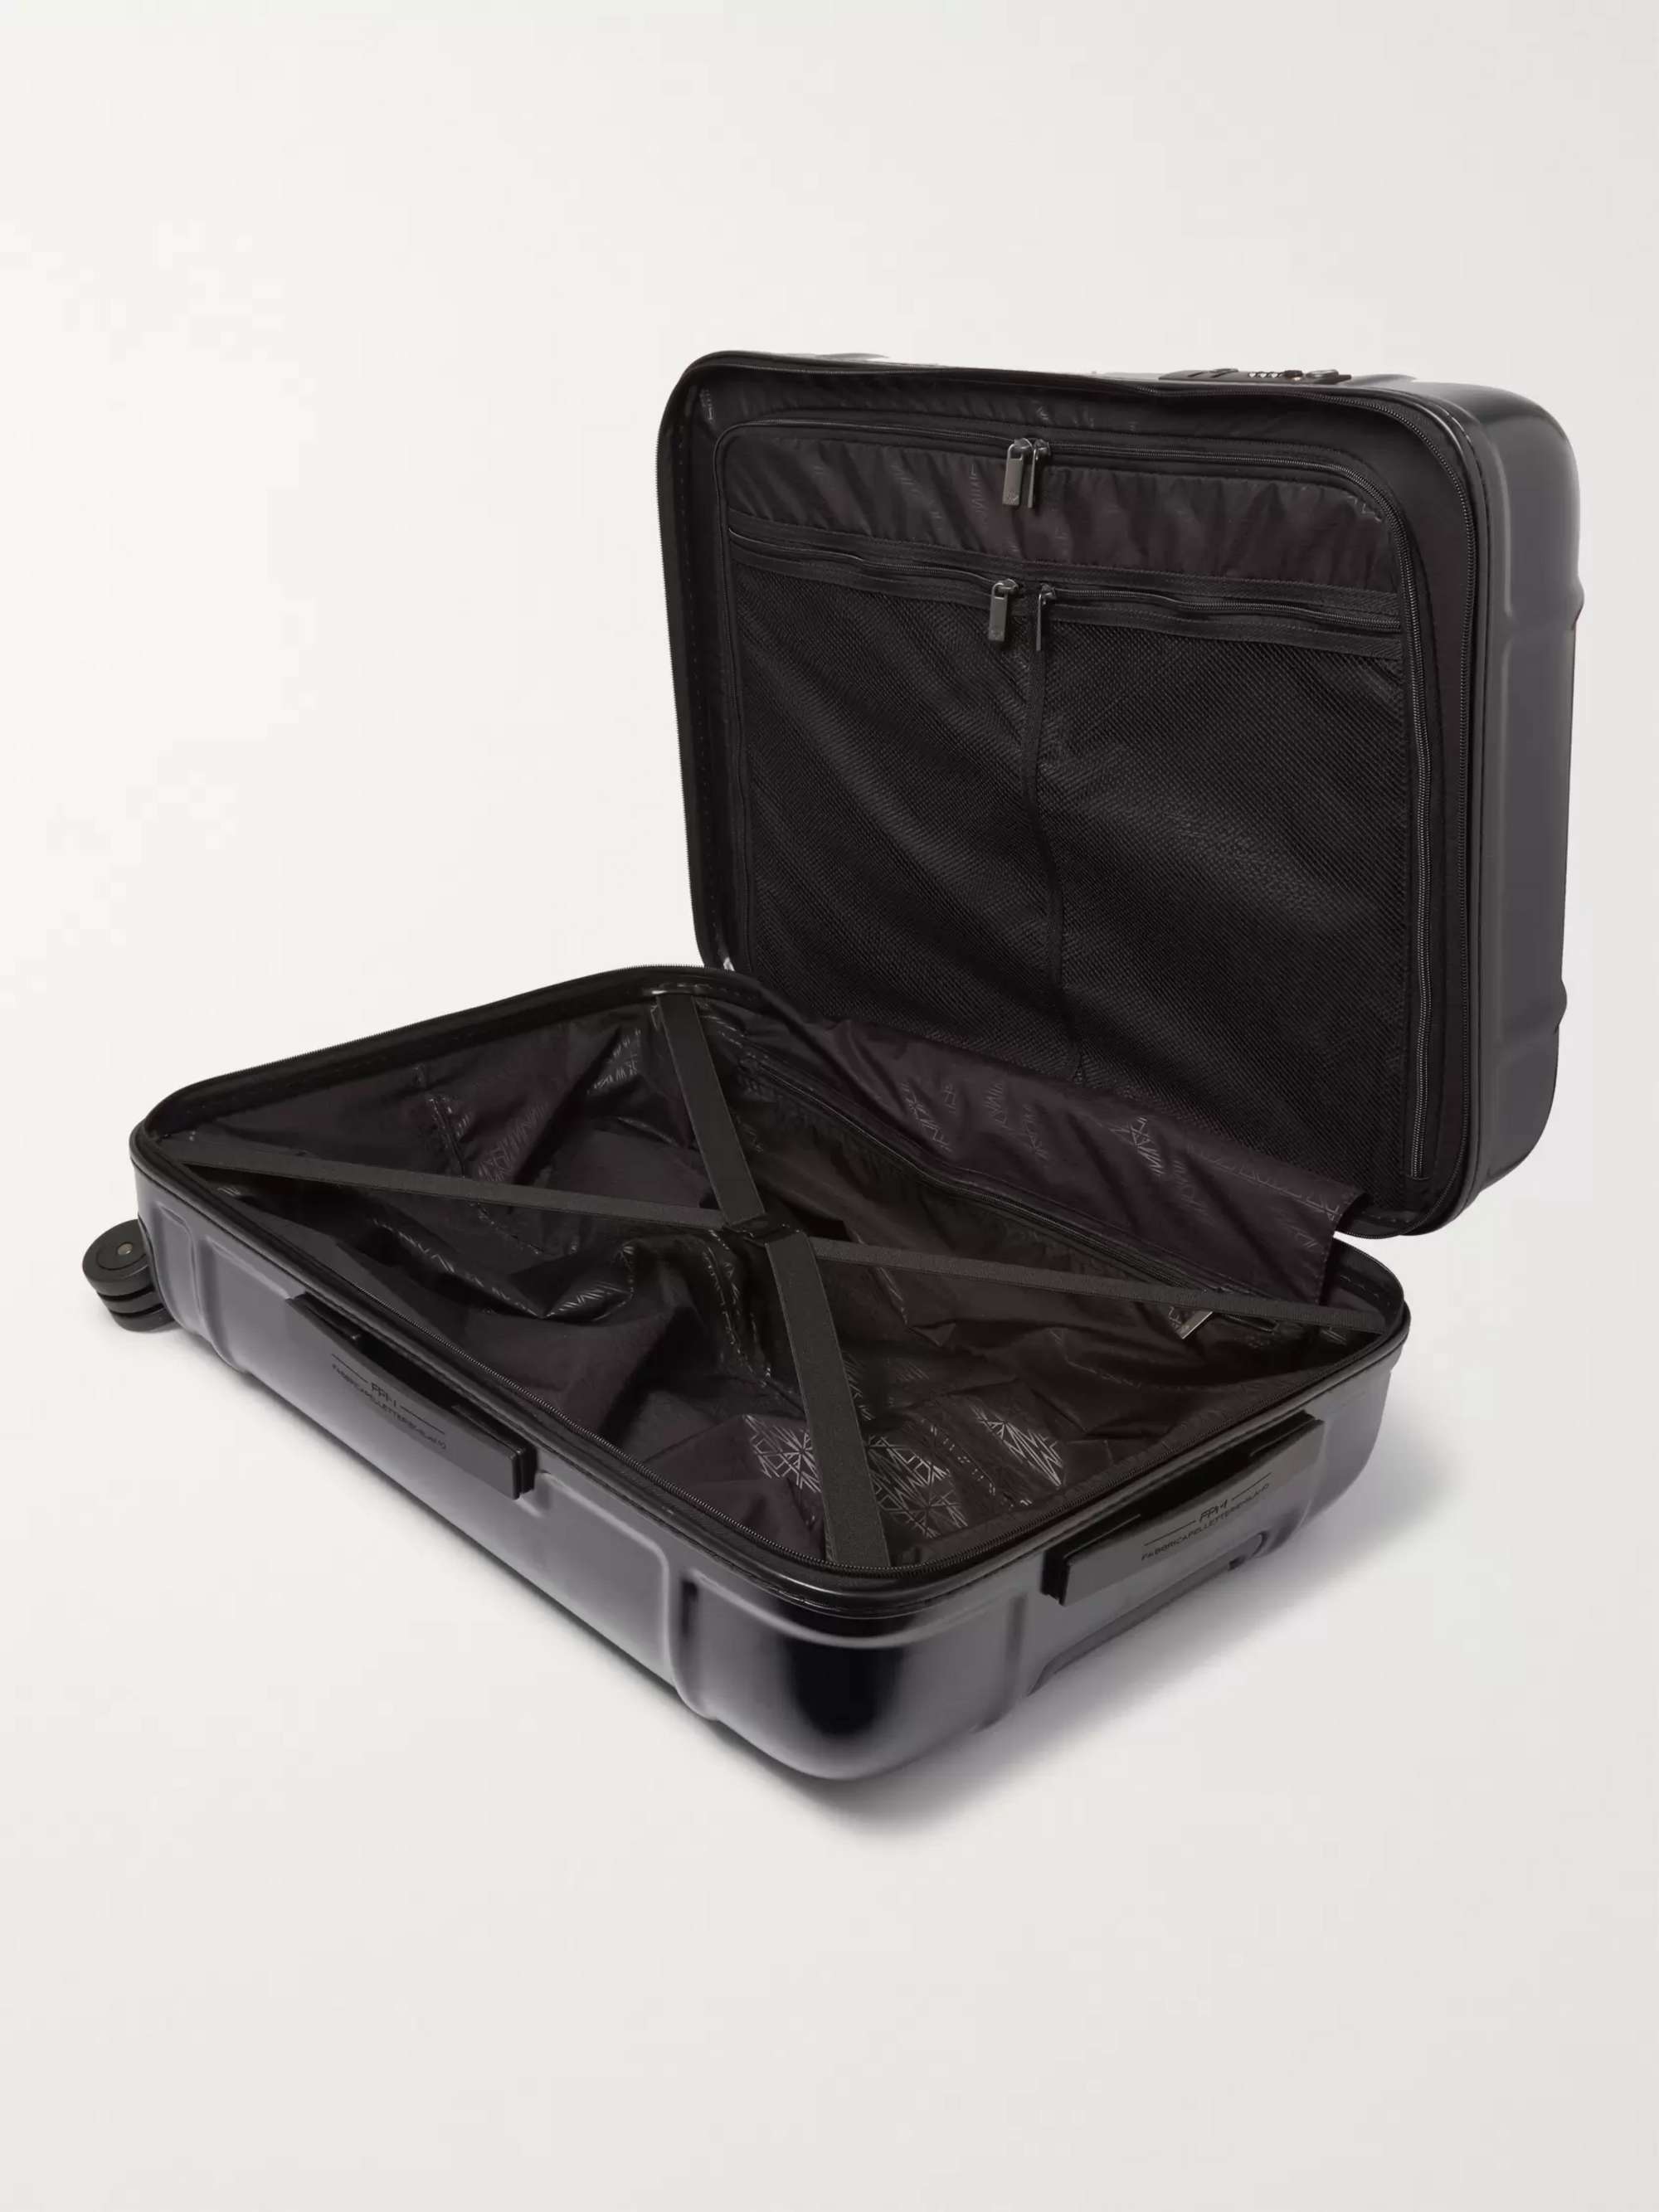 FPM MILANO Globe Spinner 68cm Leather-Trimmed Polycarbonate Suitcase